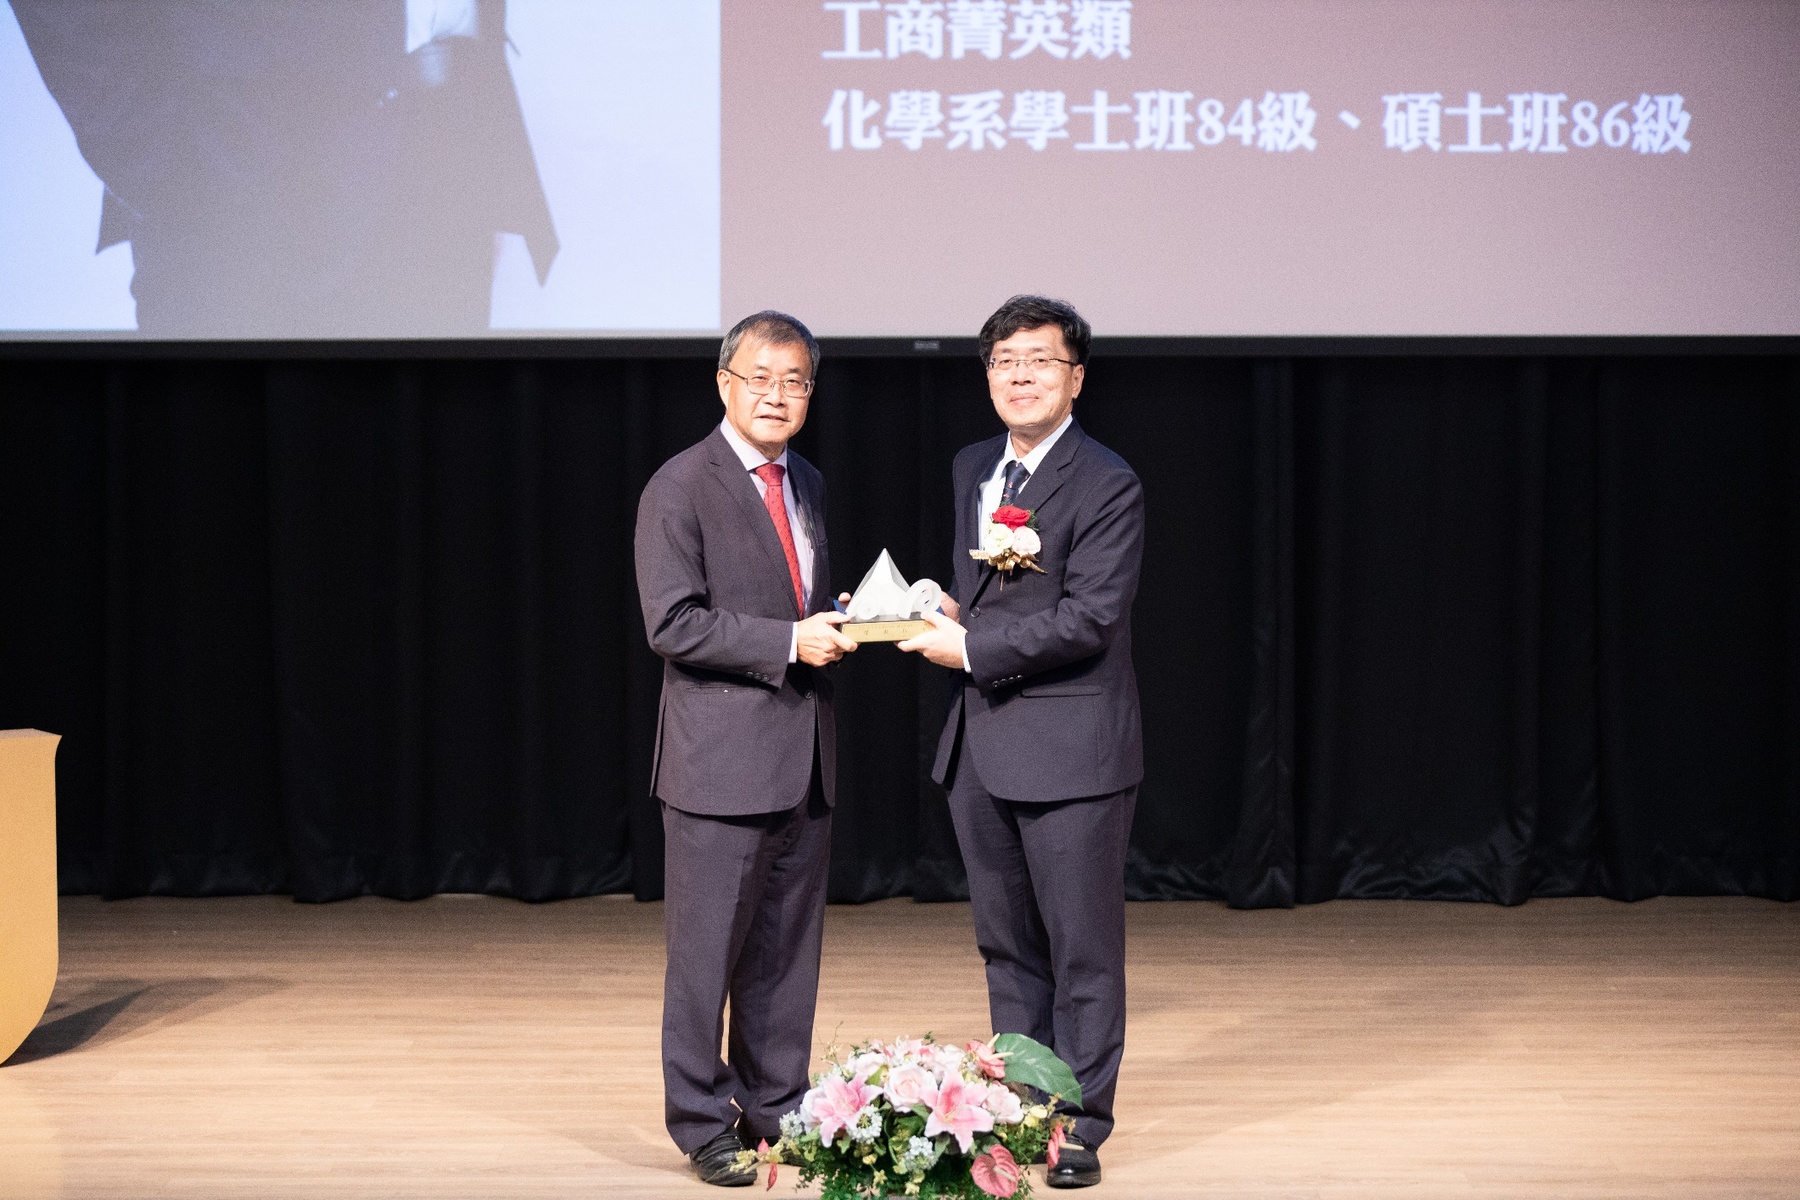 Founder and Chairman of GreenFILTEC Sven Huang, a graduate of the Department of Chemistry (BS, 1995, MS, 1997), received the Outstanding Alumni Award in the category of Business Elite.